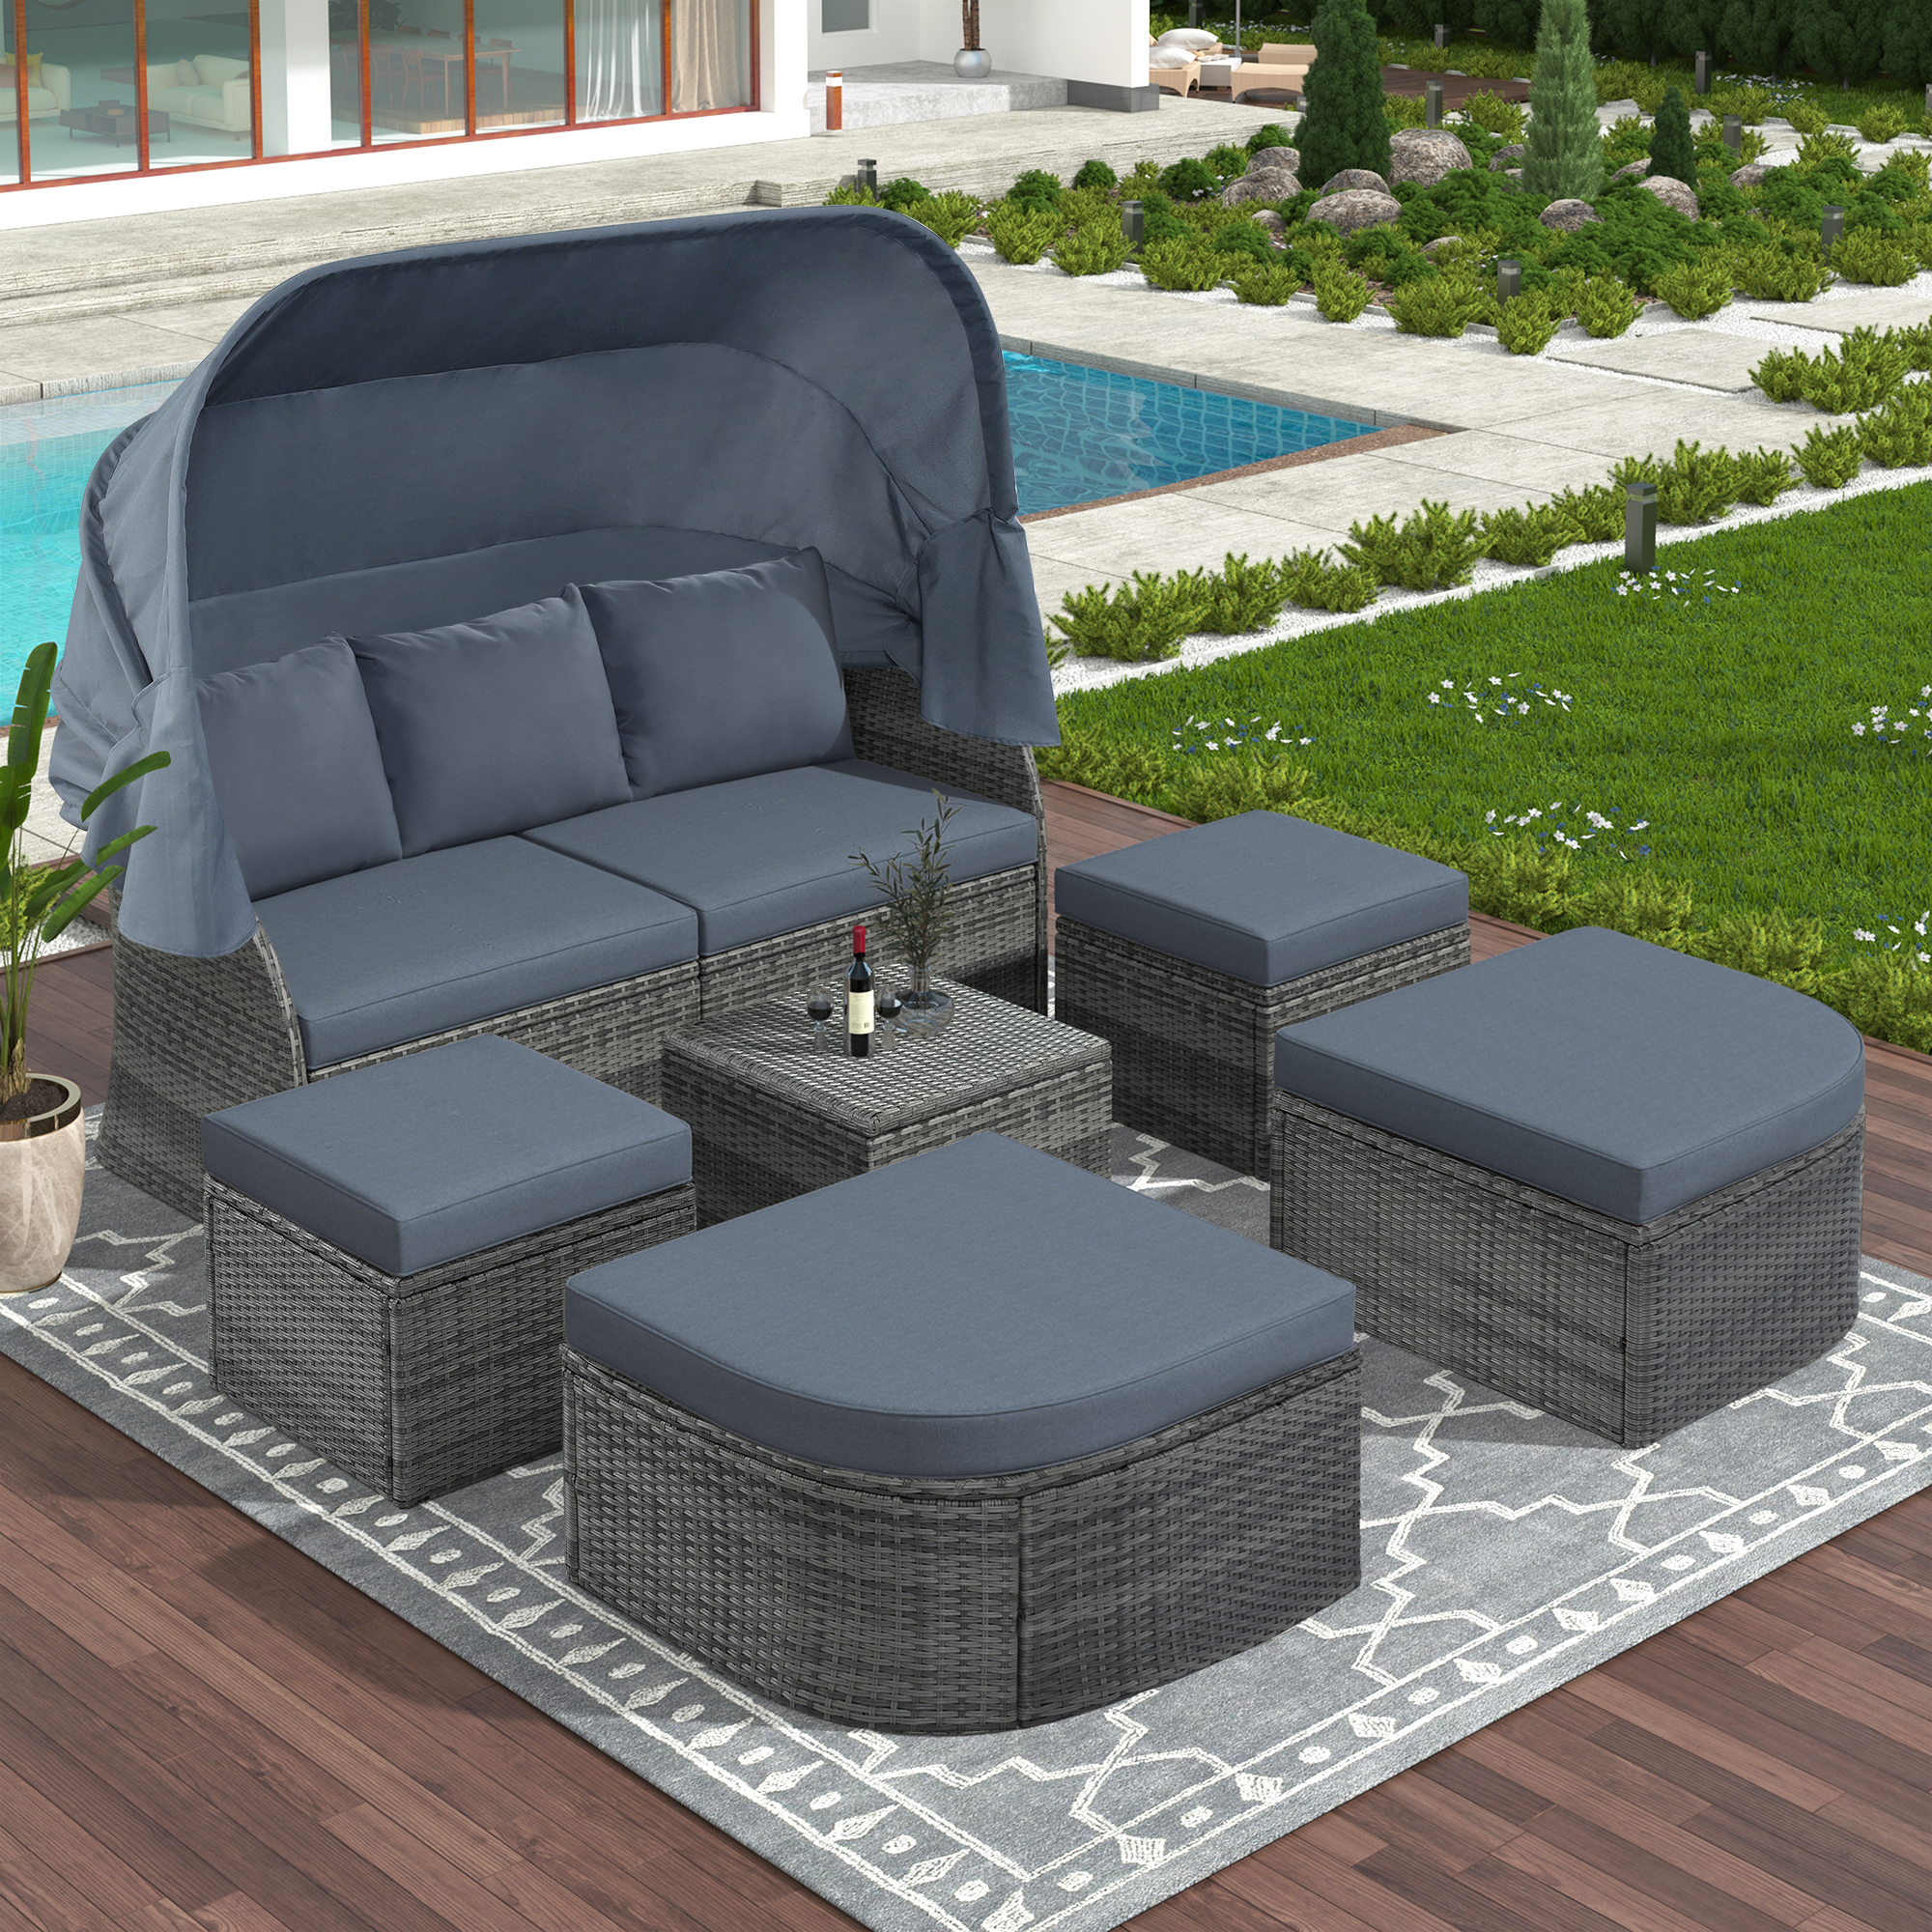 SYNGAR Outdoor Daybed with Canopy, 6 Piece PE Wicker Sectional Furniture Set with Ottomans, Rattan Conversation Sofa Set, Patio Sunbed with Cushions, for Backyard, Pool, Garden, Gray, D6940 - image 1 of 12